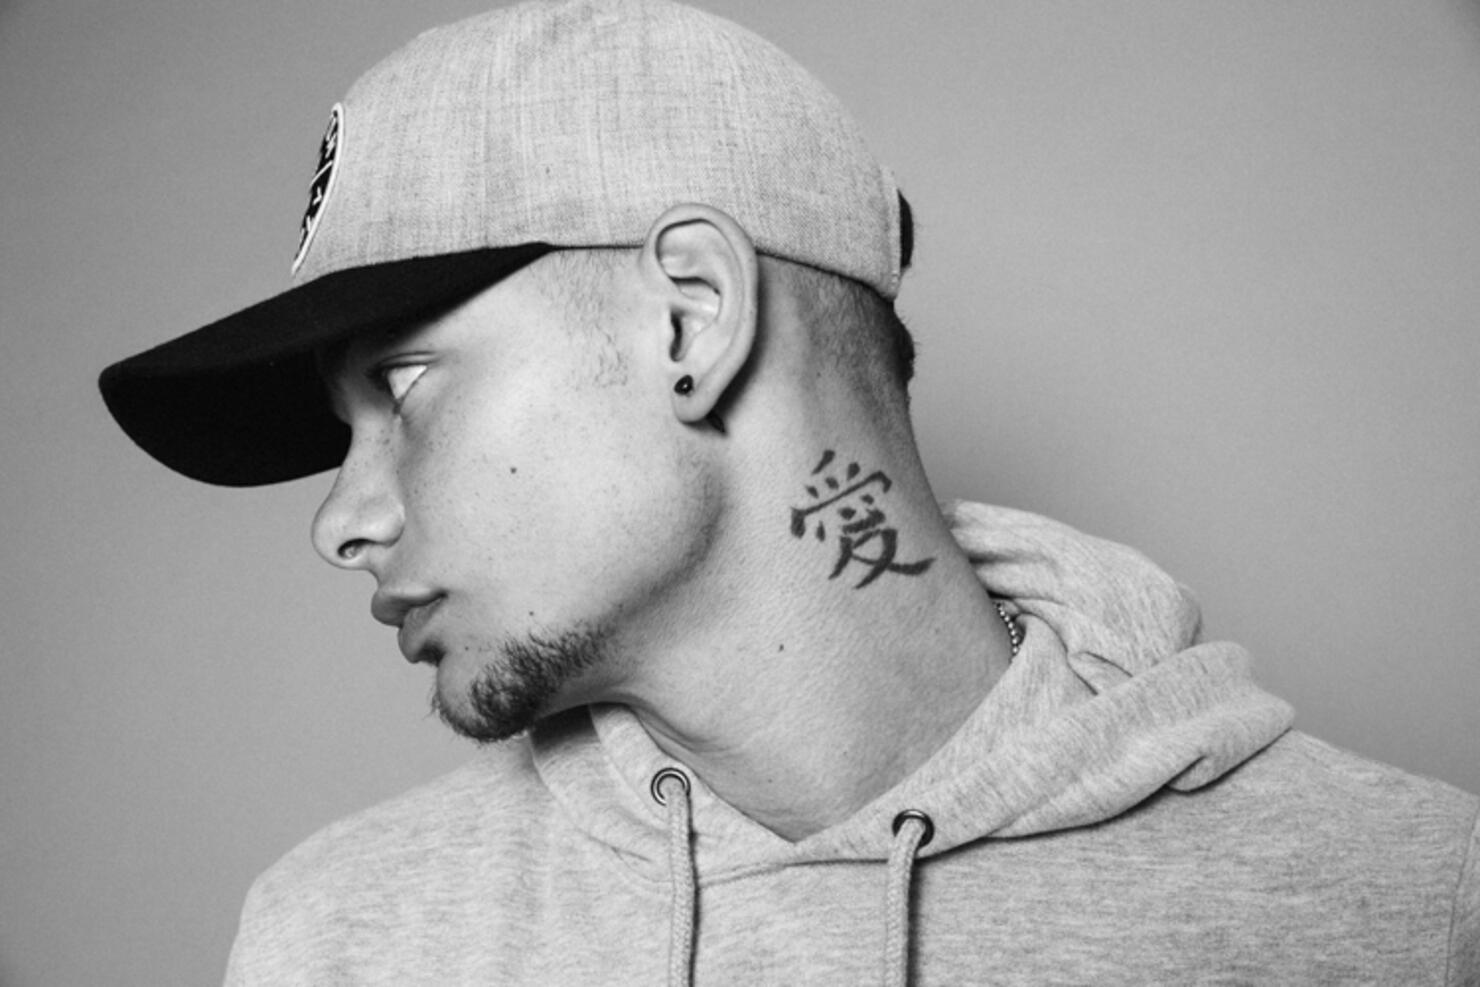 INTERVIEW: Tattoo Stories with Kane Brown | iHeart